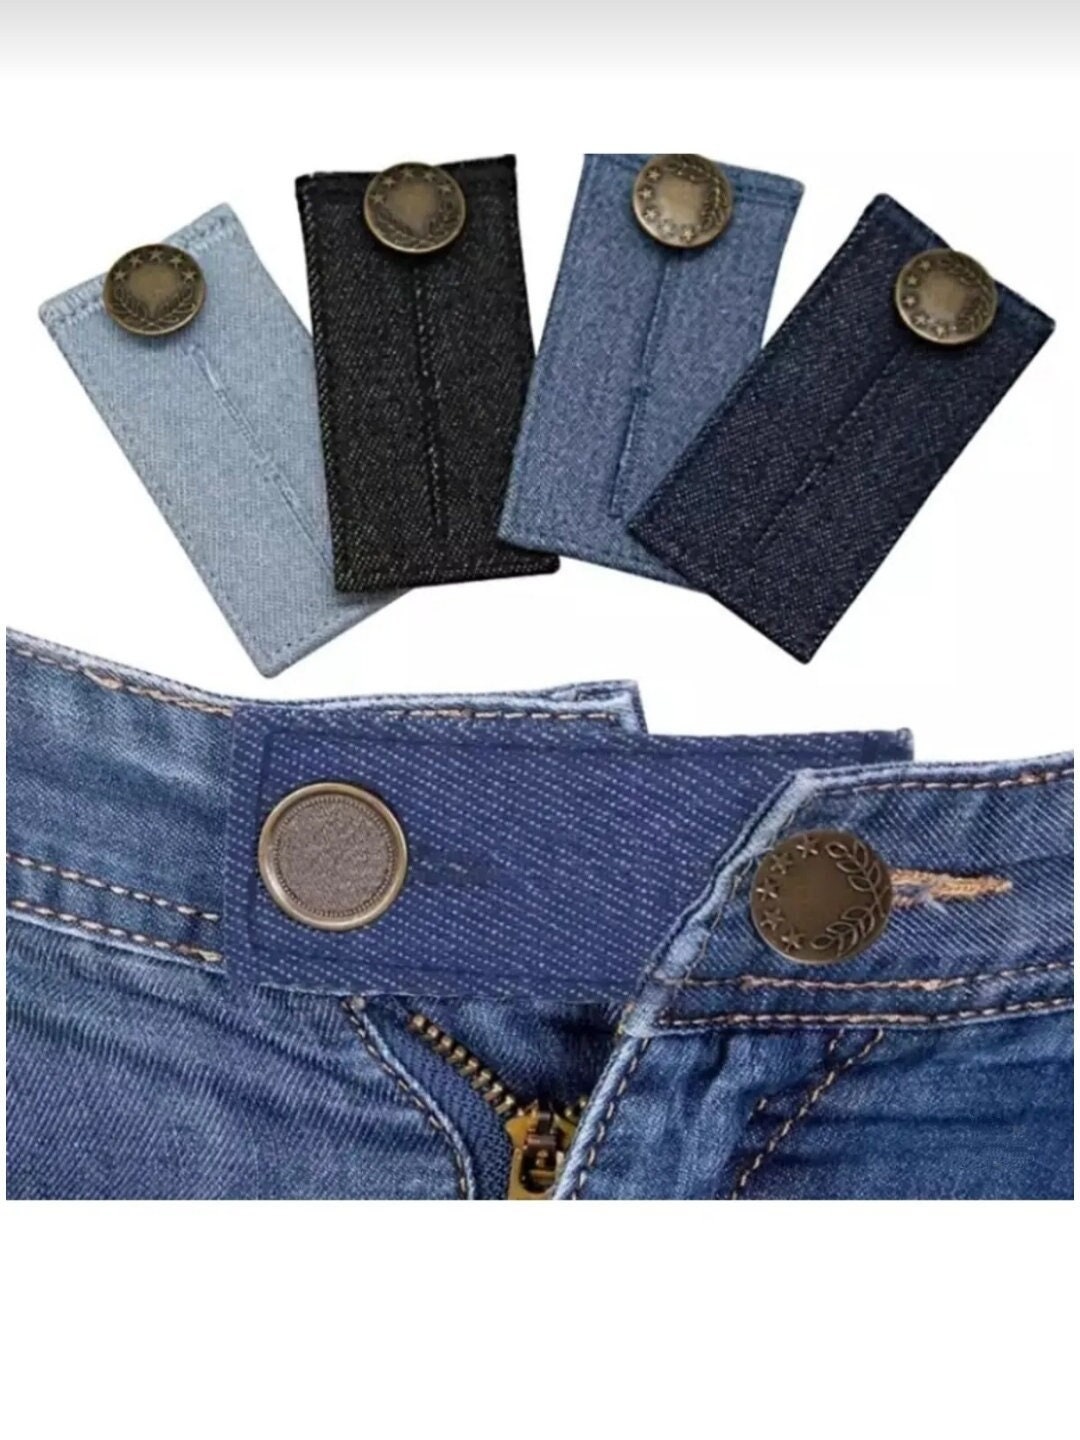 Zousen Denim Waist Extenders for Men and Women(6 Pack) Adjustable Waistband Expanders for Jeans Trousers Pants Buttons Extender Set, Blue, Large